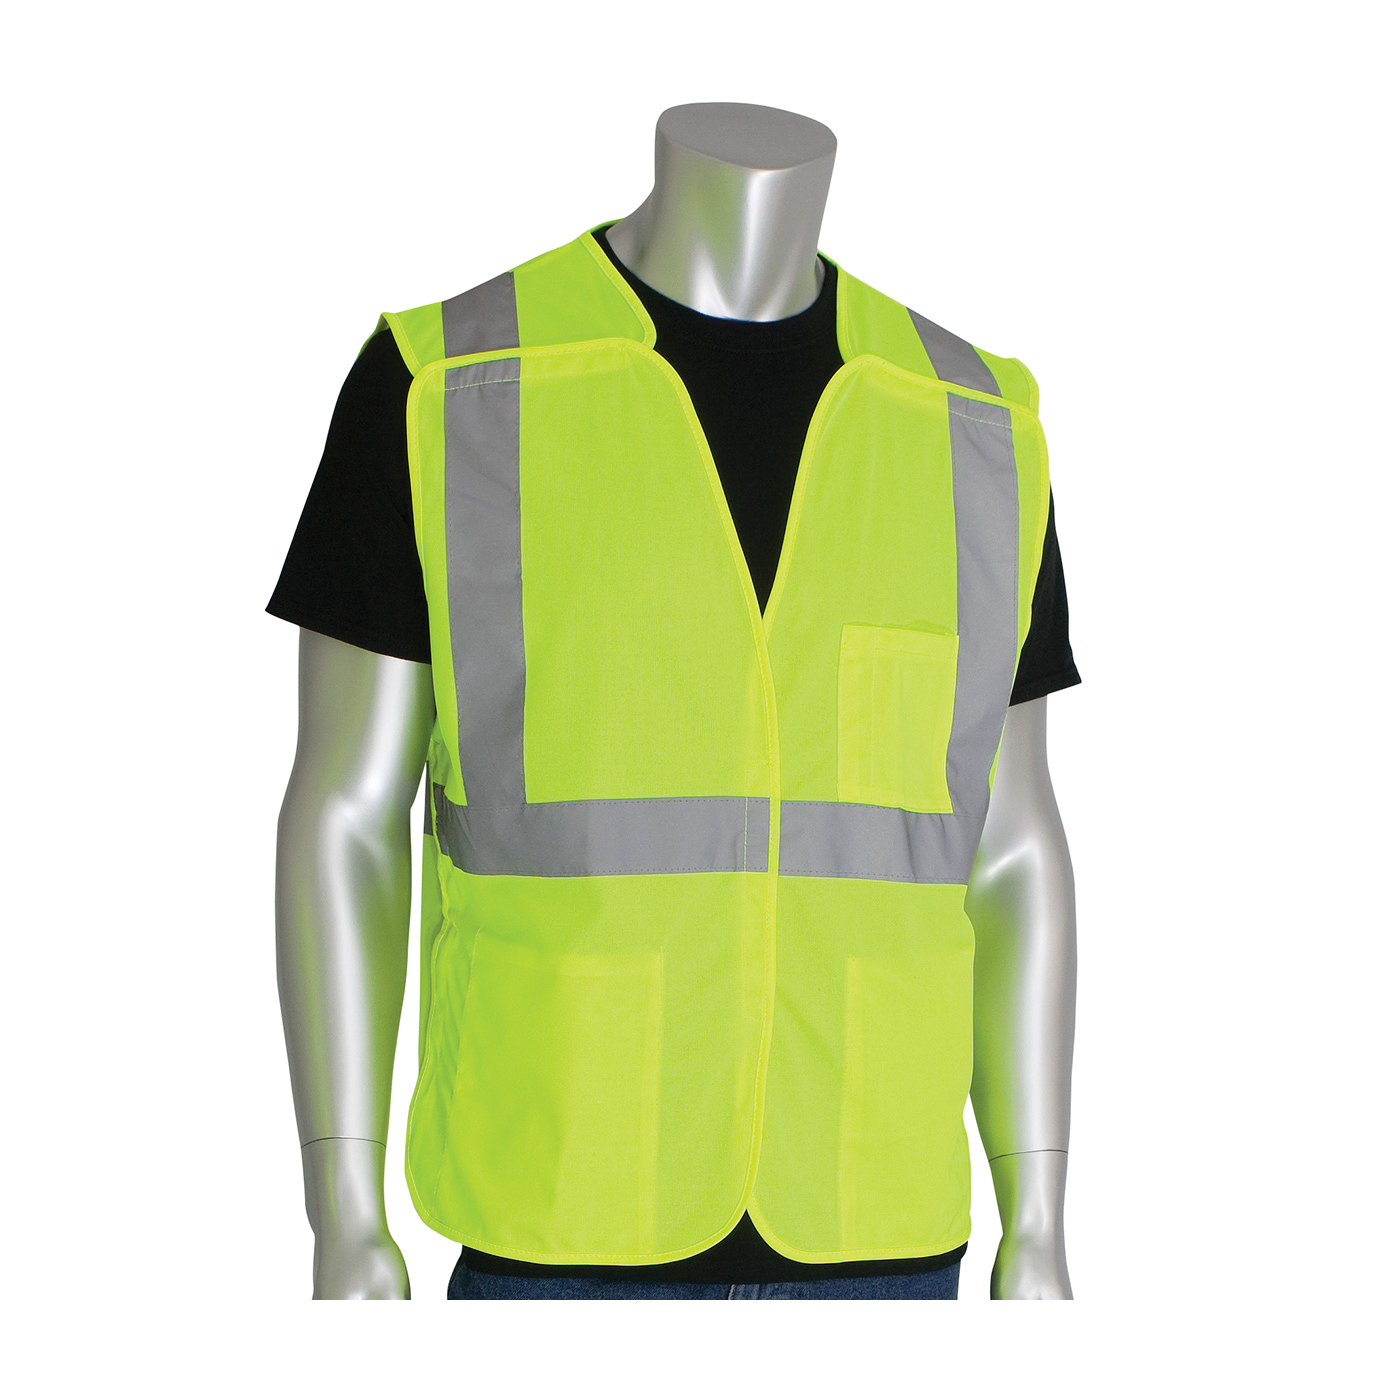 PIP® 302-5PVLY-5X Safety Vest, 5XL, Hi-Viz Lime Yellow, Polyester, Hook and Loop Closure, 3 Pockets, ANSI Class: Class 2, Specifications Met: ANSI 107 Type R